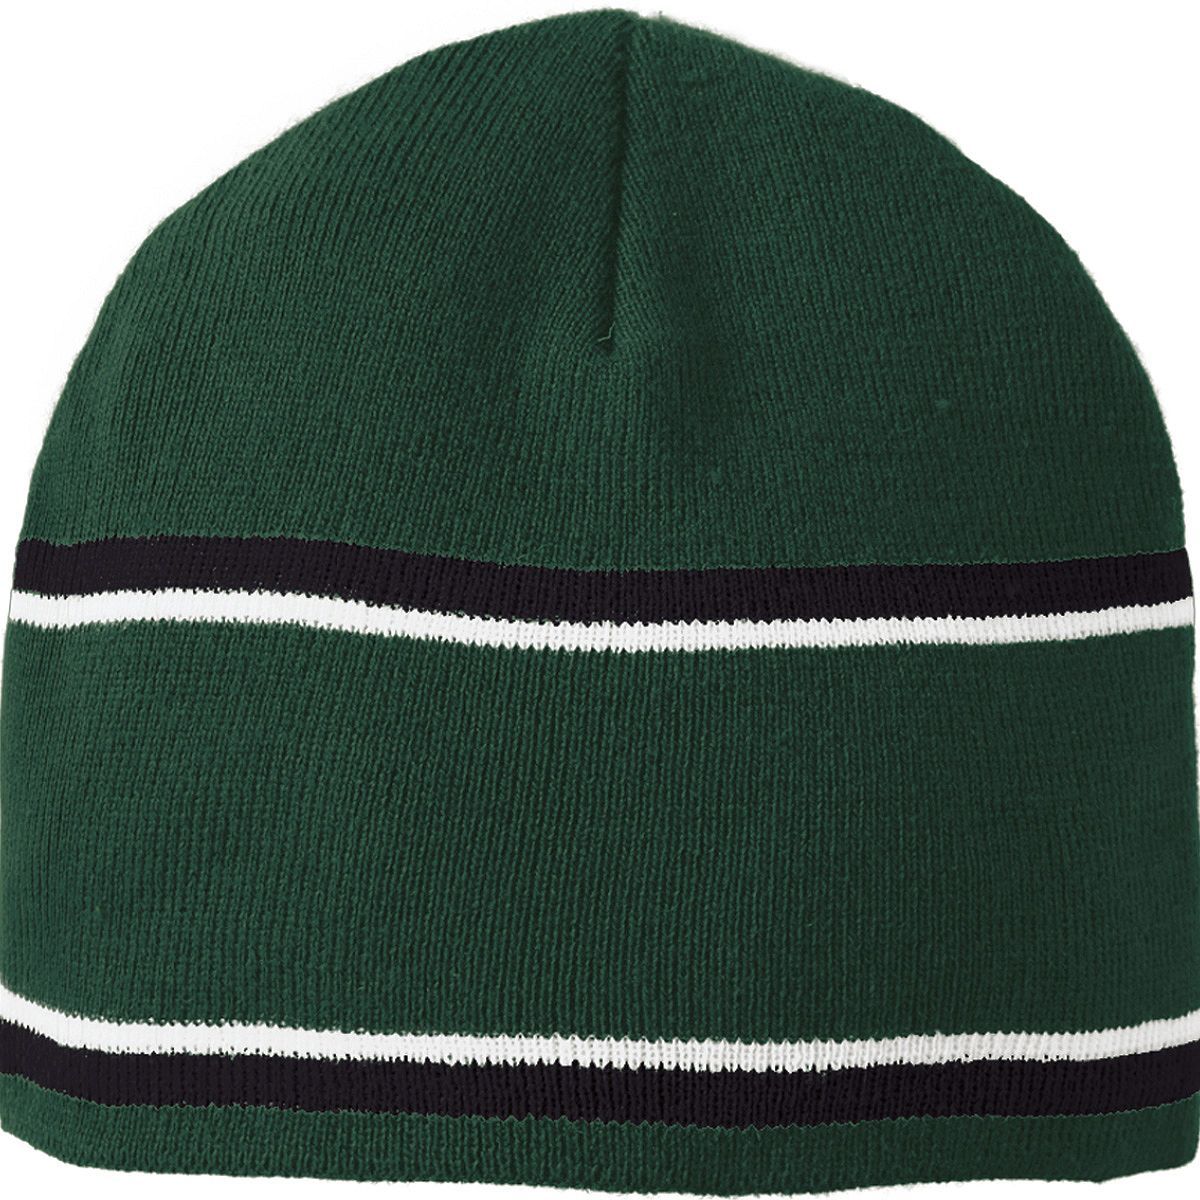 ENGAGER BEANIE from Holloway